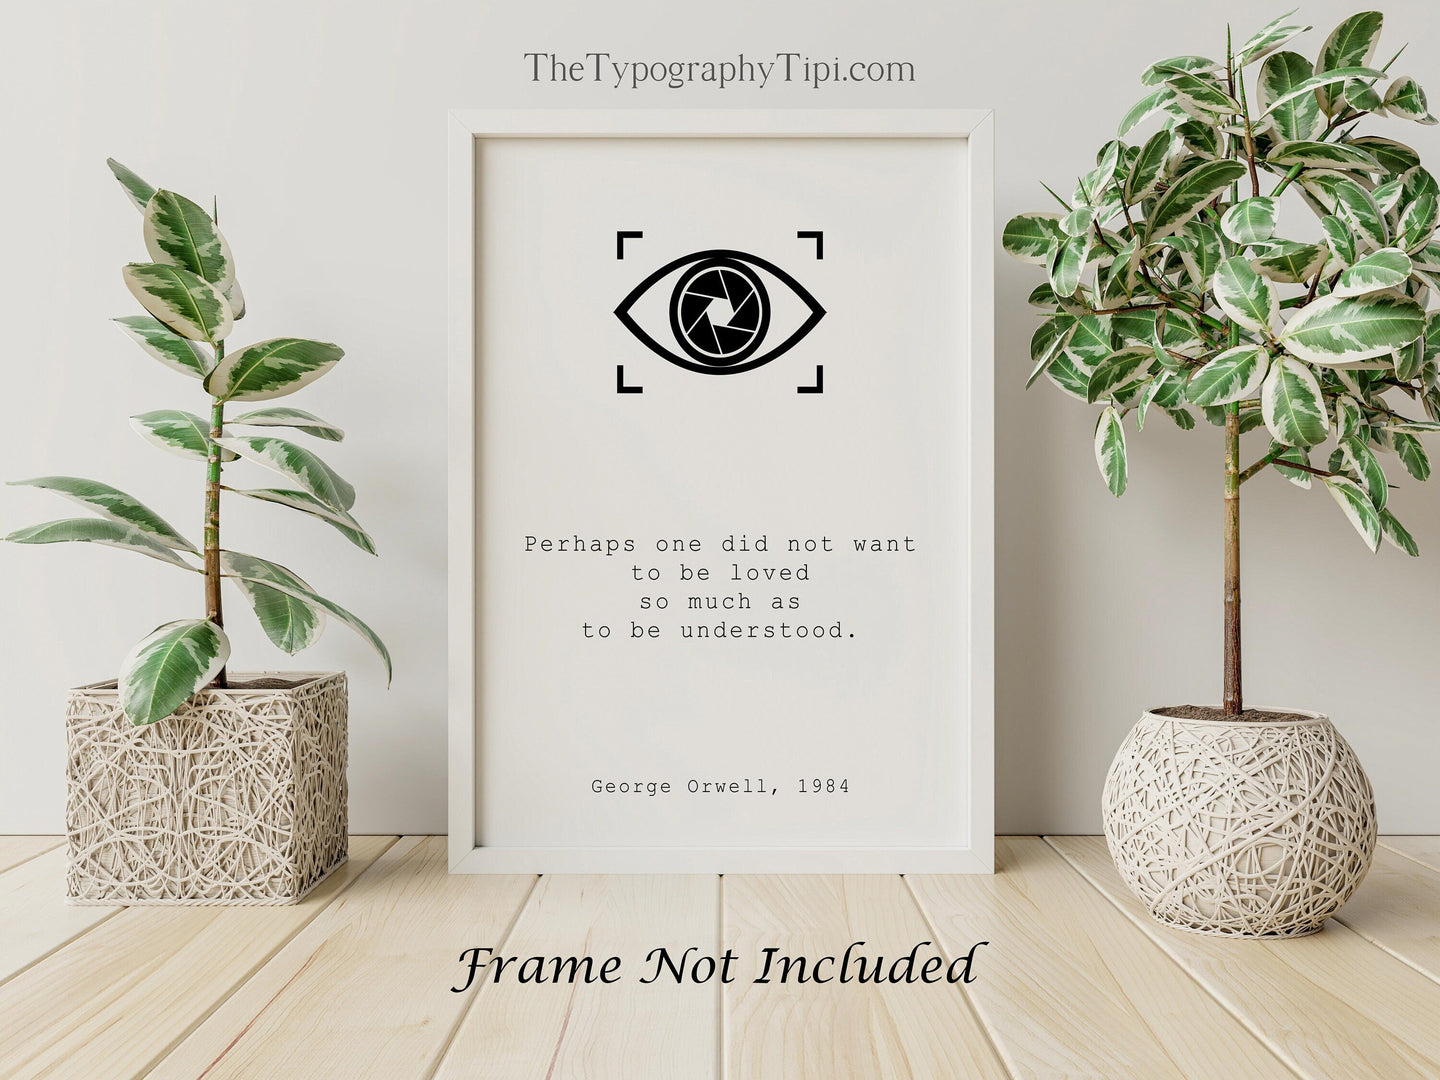 George Orwell, 1984 Quote Print - Perhaps one did not want to be loved so much as to be understood - UNFRAMED - Literary Wall Art